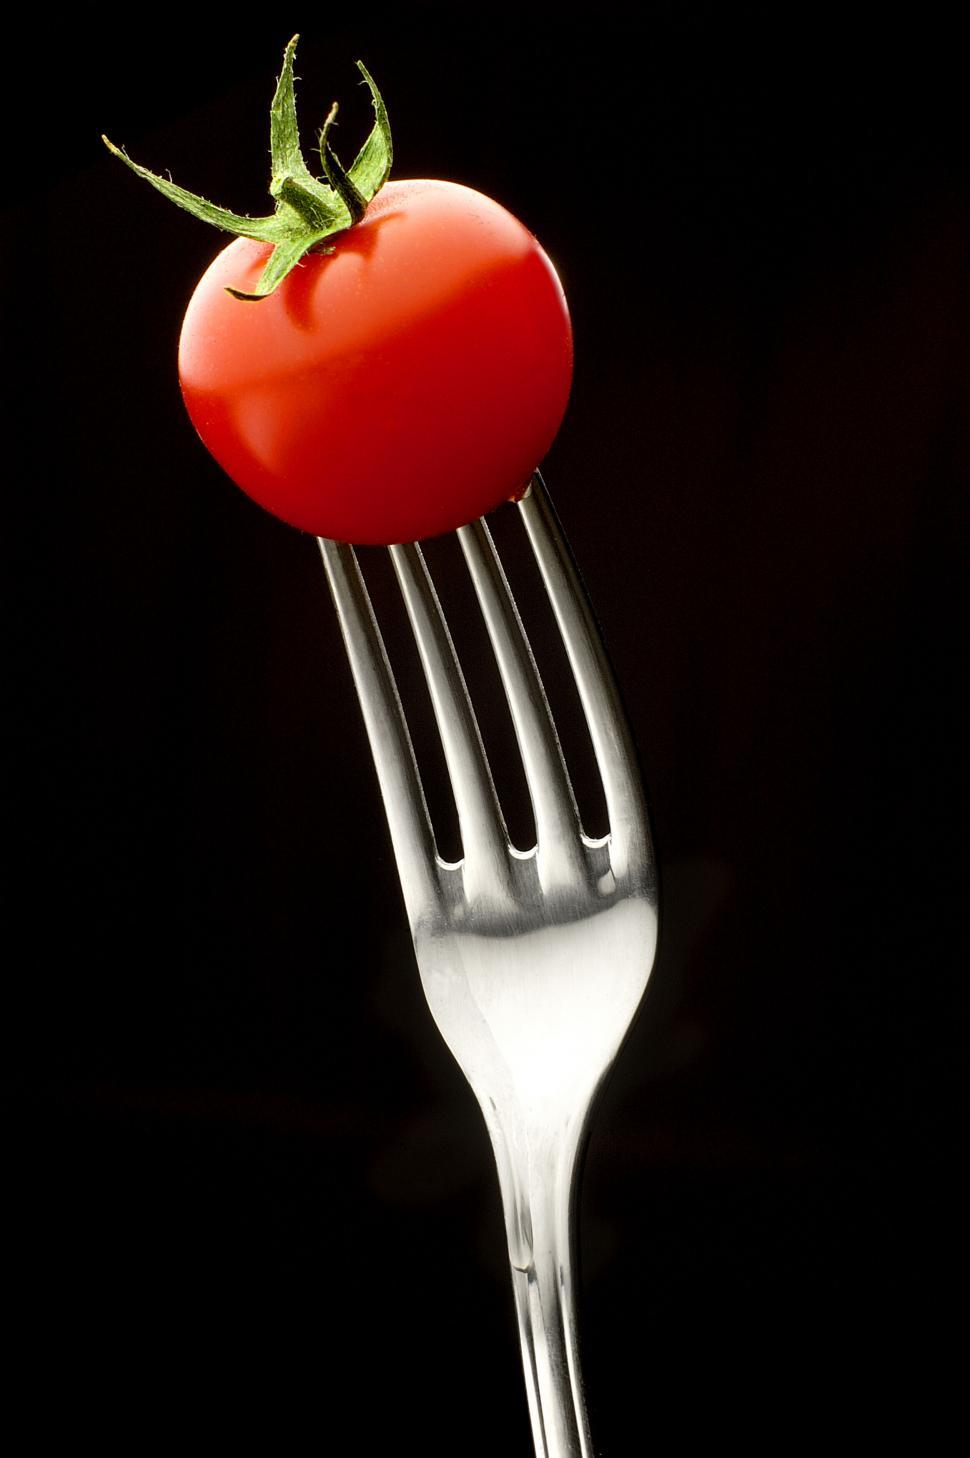 Free Image of Juicy tomato pierced by a fork macro shot 